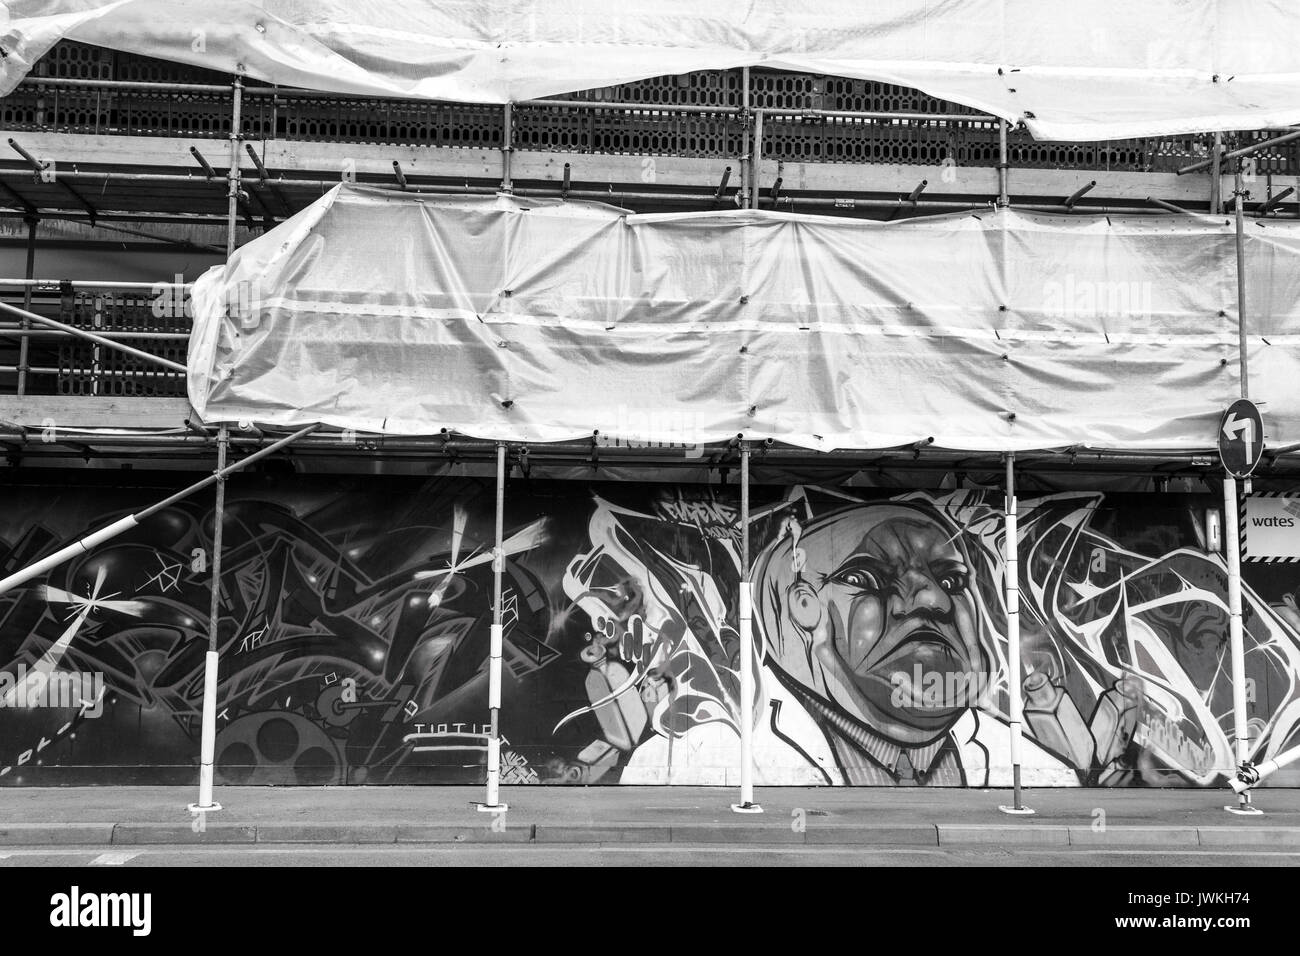 Building Graffiti Artwork, Scaffolding, Street Art Black and White Image, Person Cartoon Character Painted, Fixing, Workers Platform, Closed Off Stock Photo